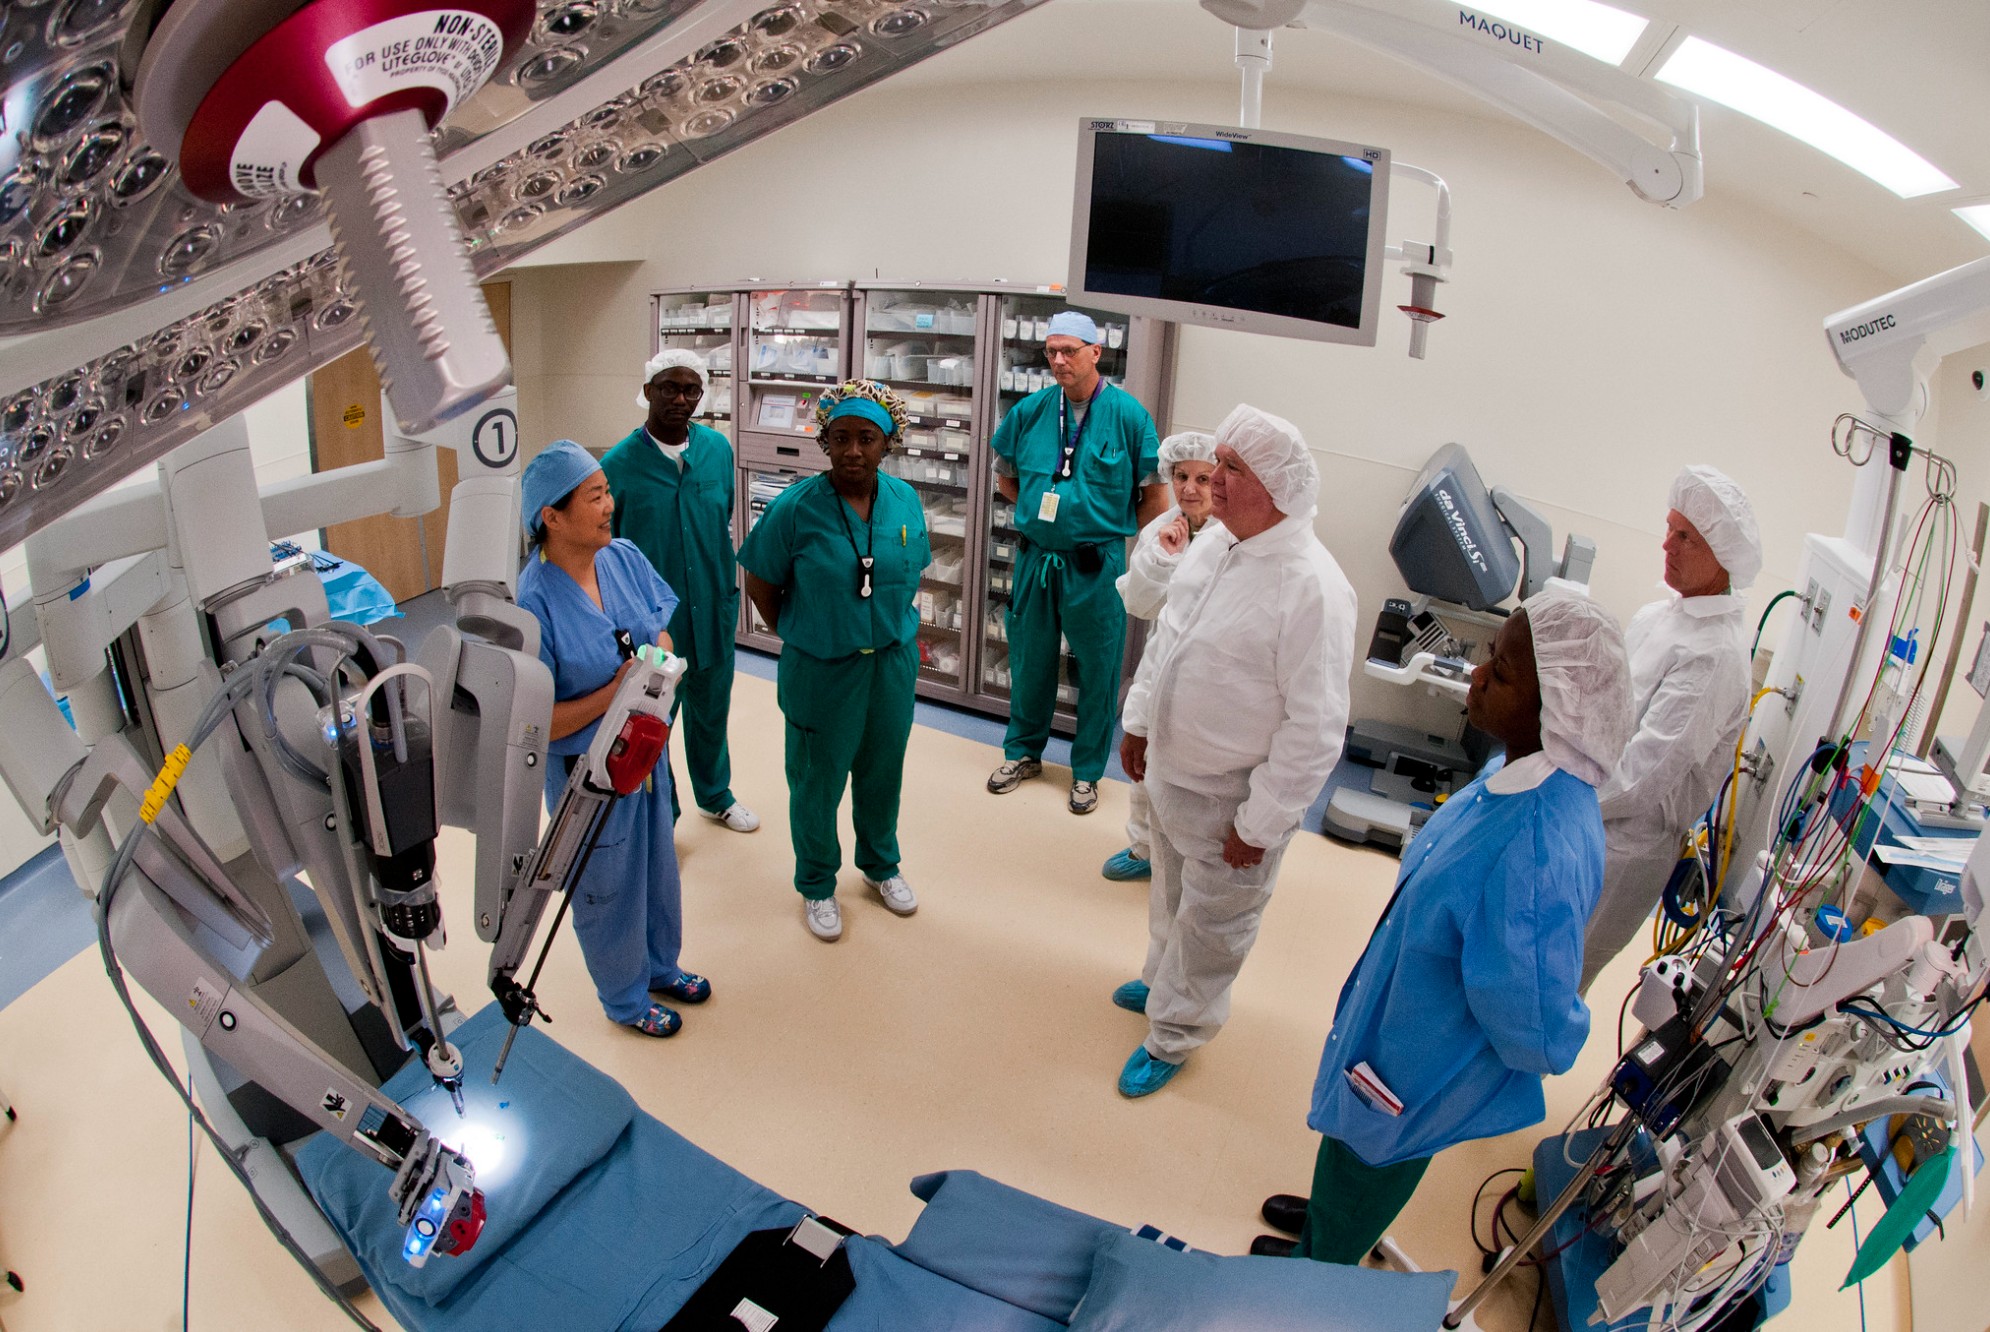 Medical personnel dialog with one another in an operating room.